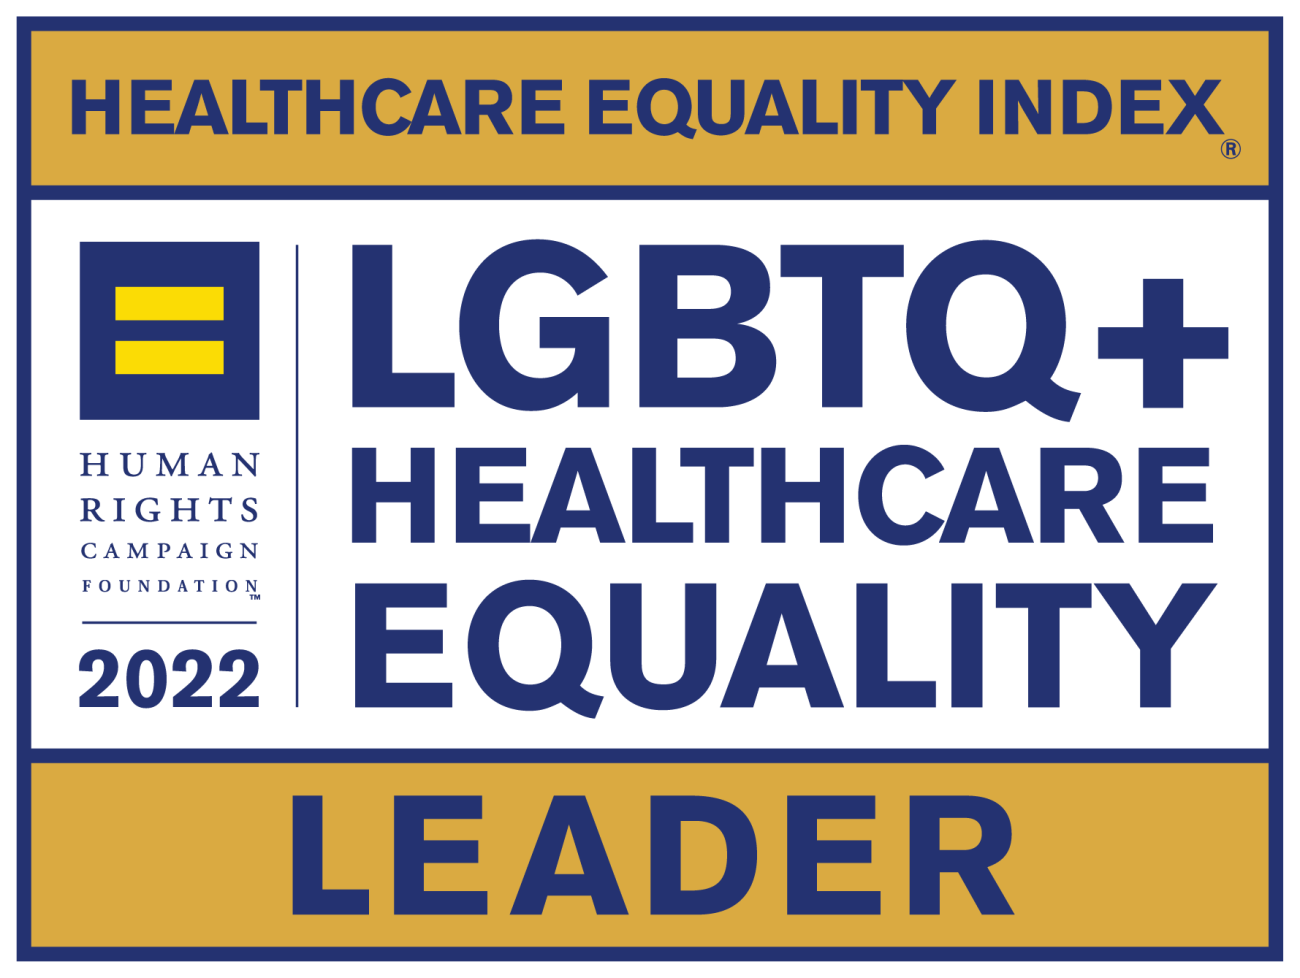 Image shows the Human Rights Campaign Foundation's 2022 LBGTQ+ Healthcare Equality Leader badge